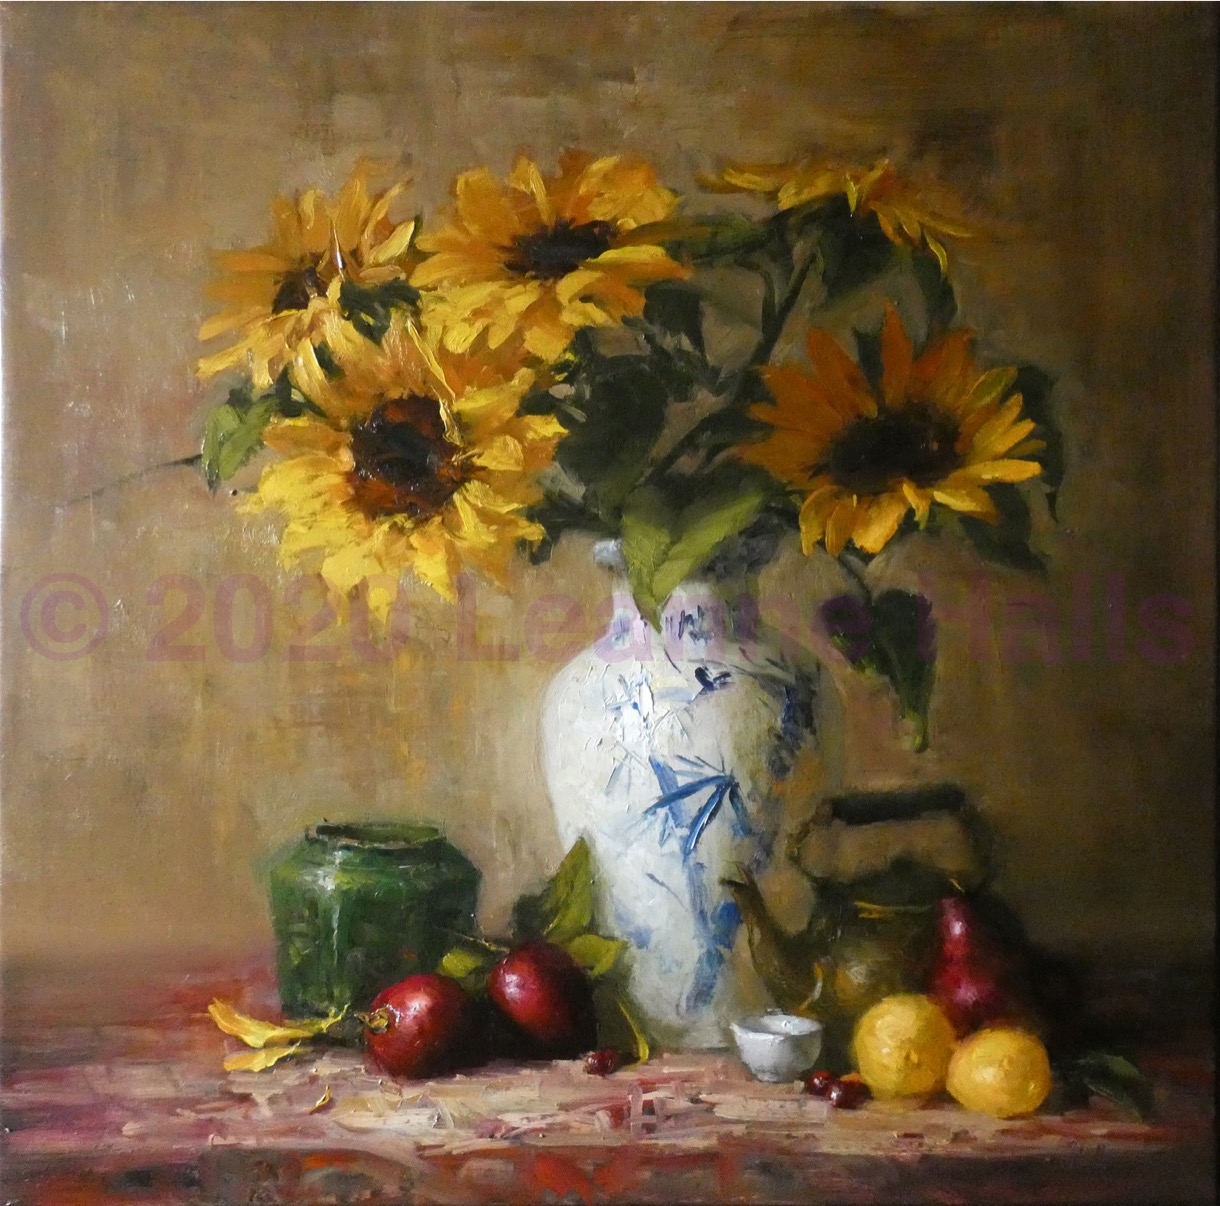 Sunflowers and Winter Fruits